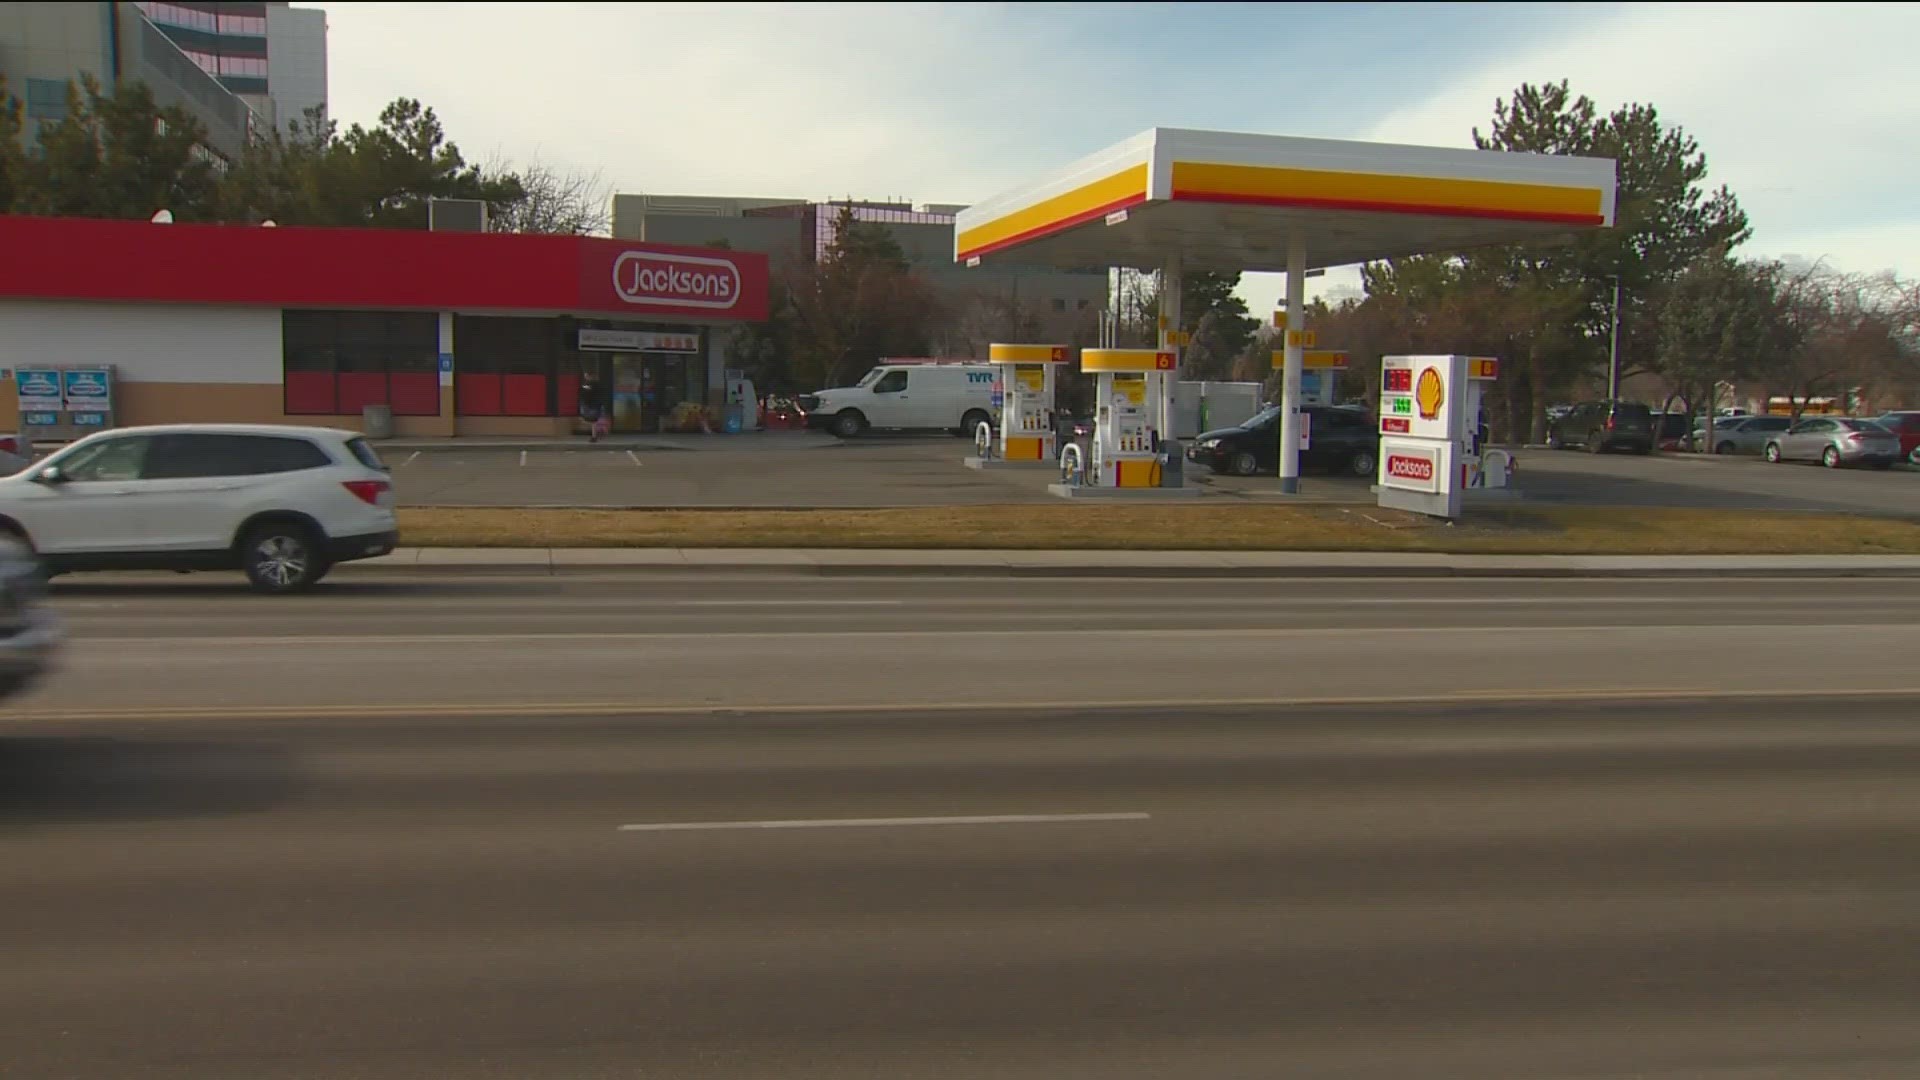 An average of $3.85 per gallon in Boise is down 3.3 cents from last week, according to GasBuddy. Prices are still up 6.5 cents per gallon from a month ago.